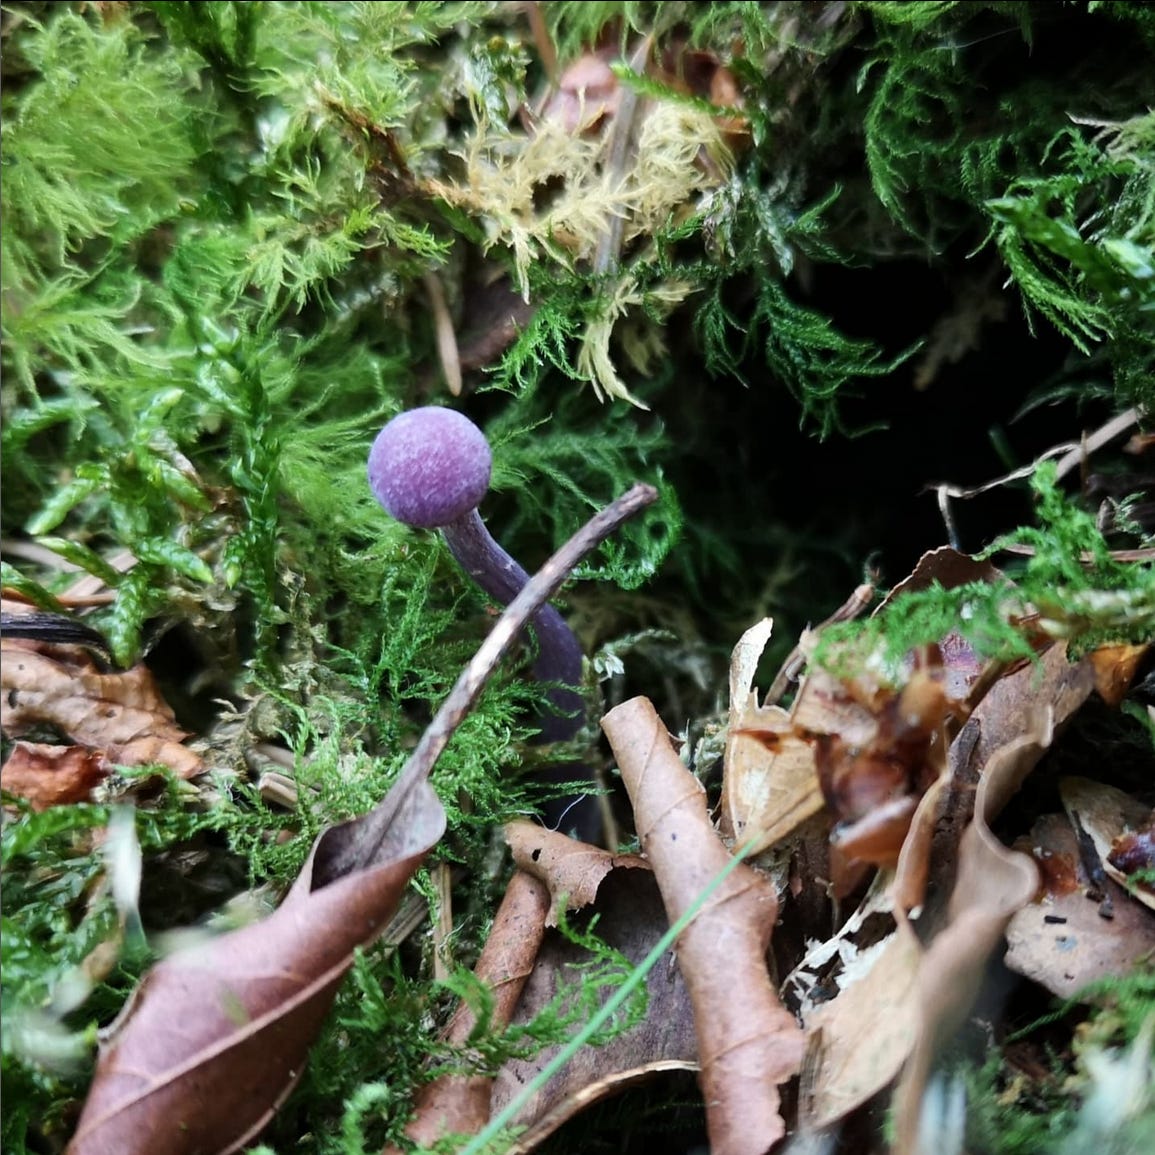 Image description: a tiny purple mushroom, probably an amethyst deceiver, pokes their way gently up through the moss and leaf litter to greet a very excited human with a camera.